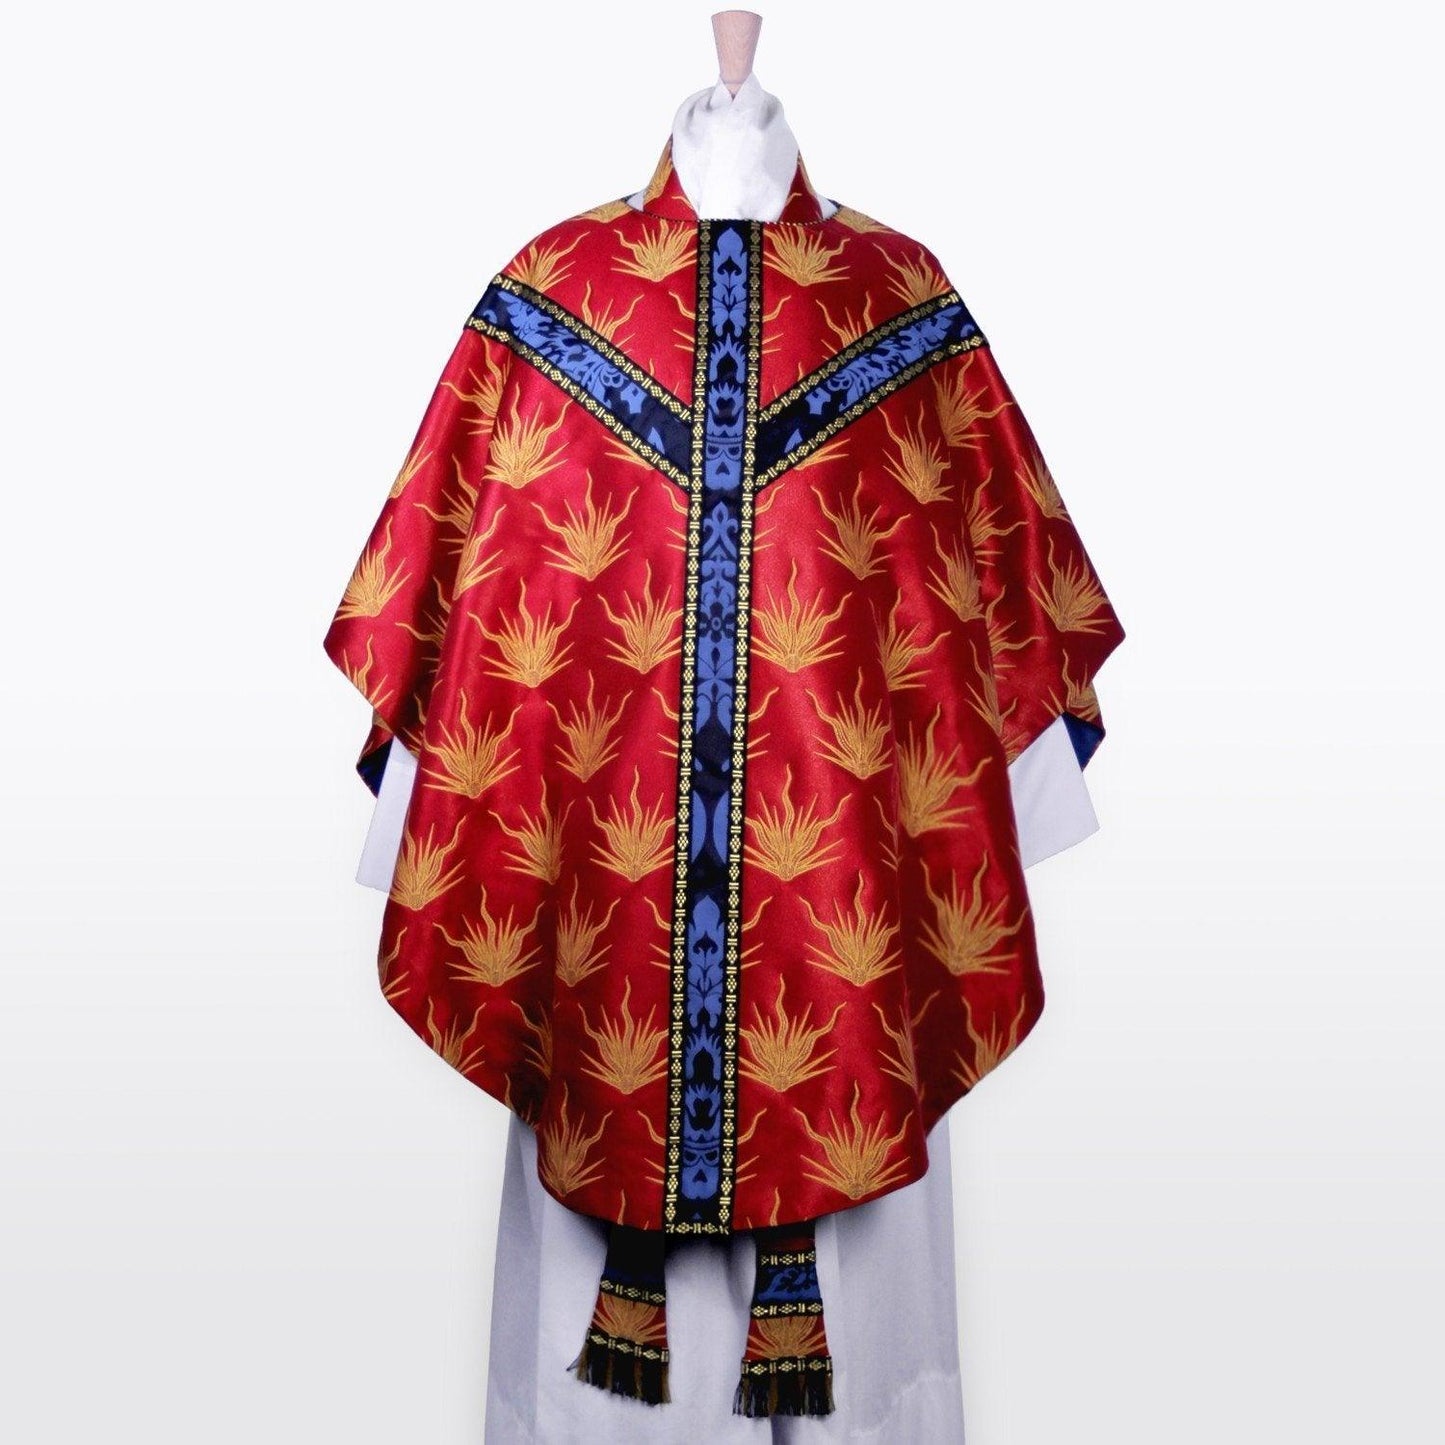 Sarum Style Chasuble in Red Pentecost Brocade - Watts & Co. (international)